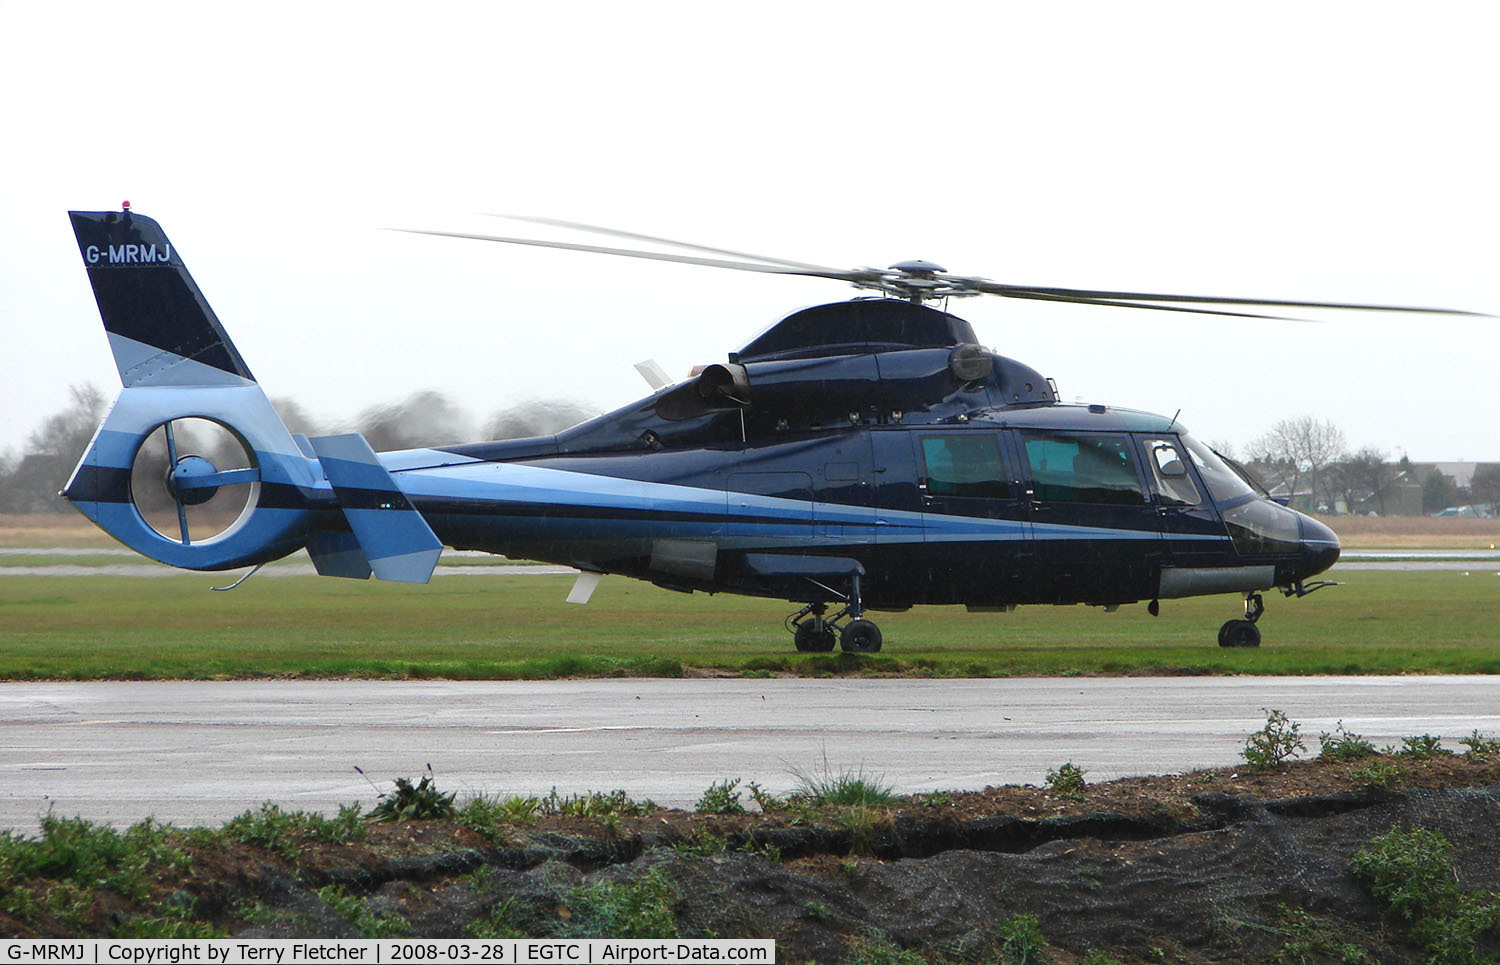 G-MRMJ, 2005 Eurocopter AS-365N-3 Dauphin 2 C/N 6713, Visiting helicopter to Cranfield